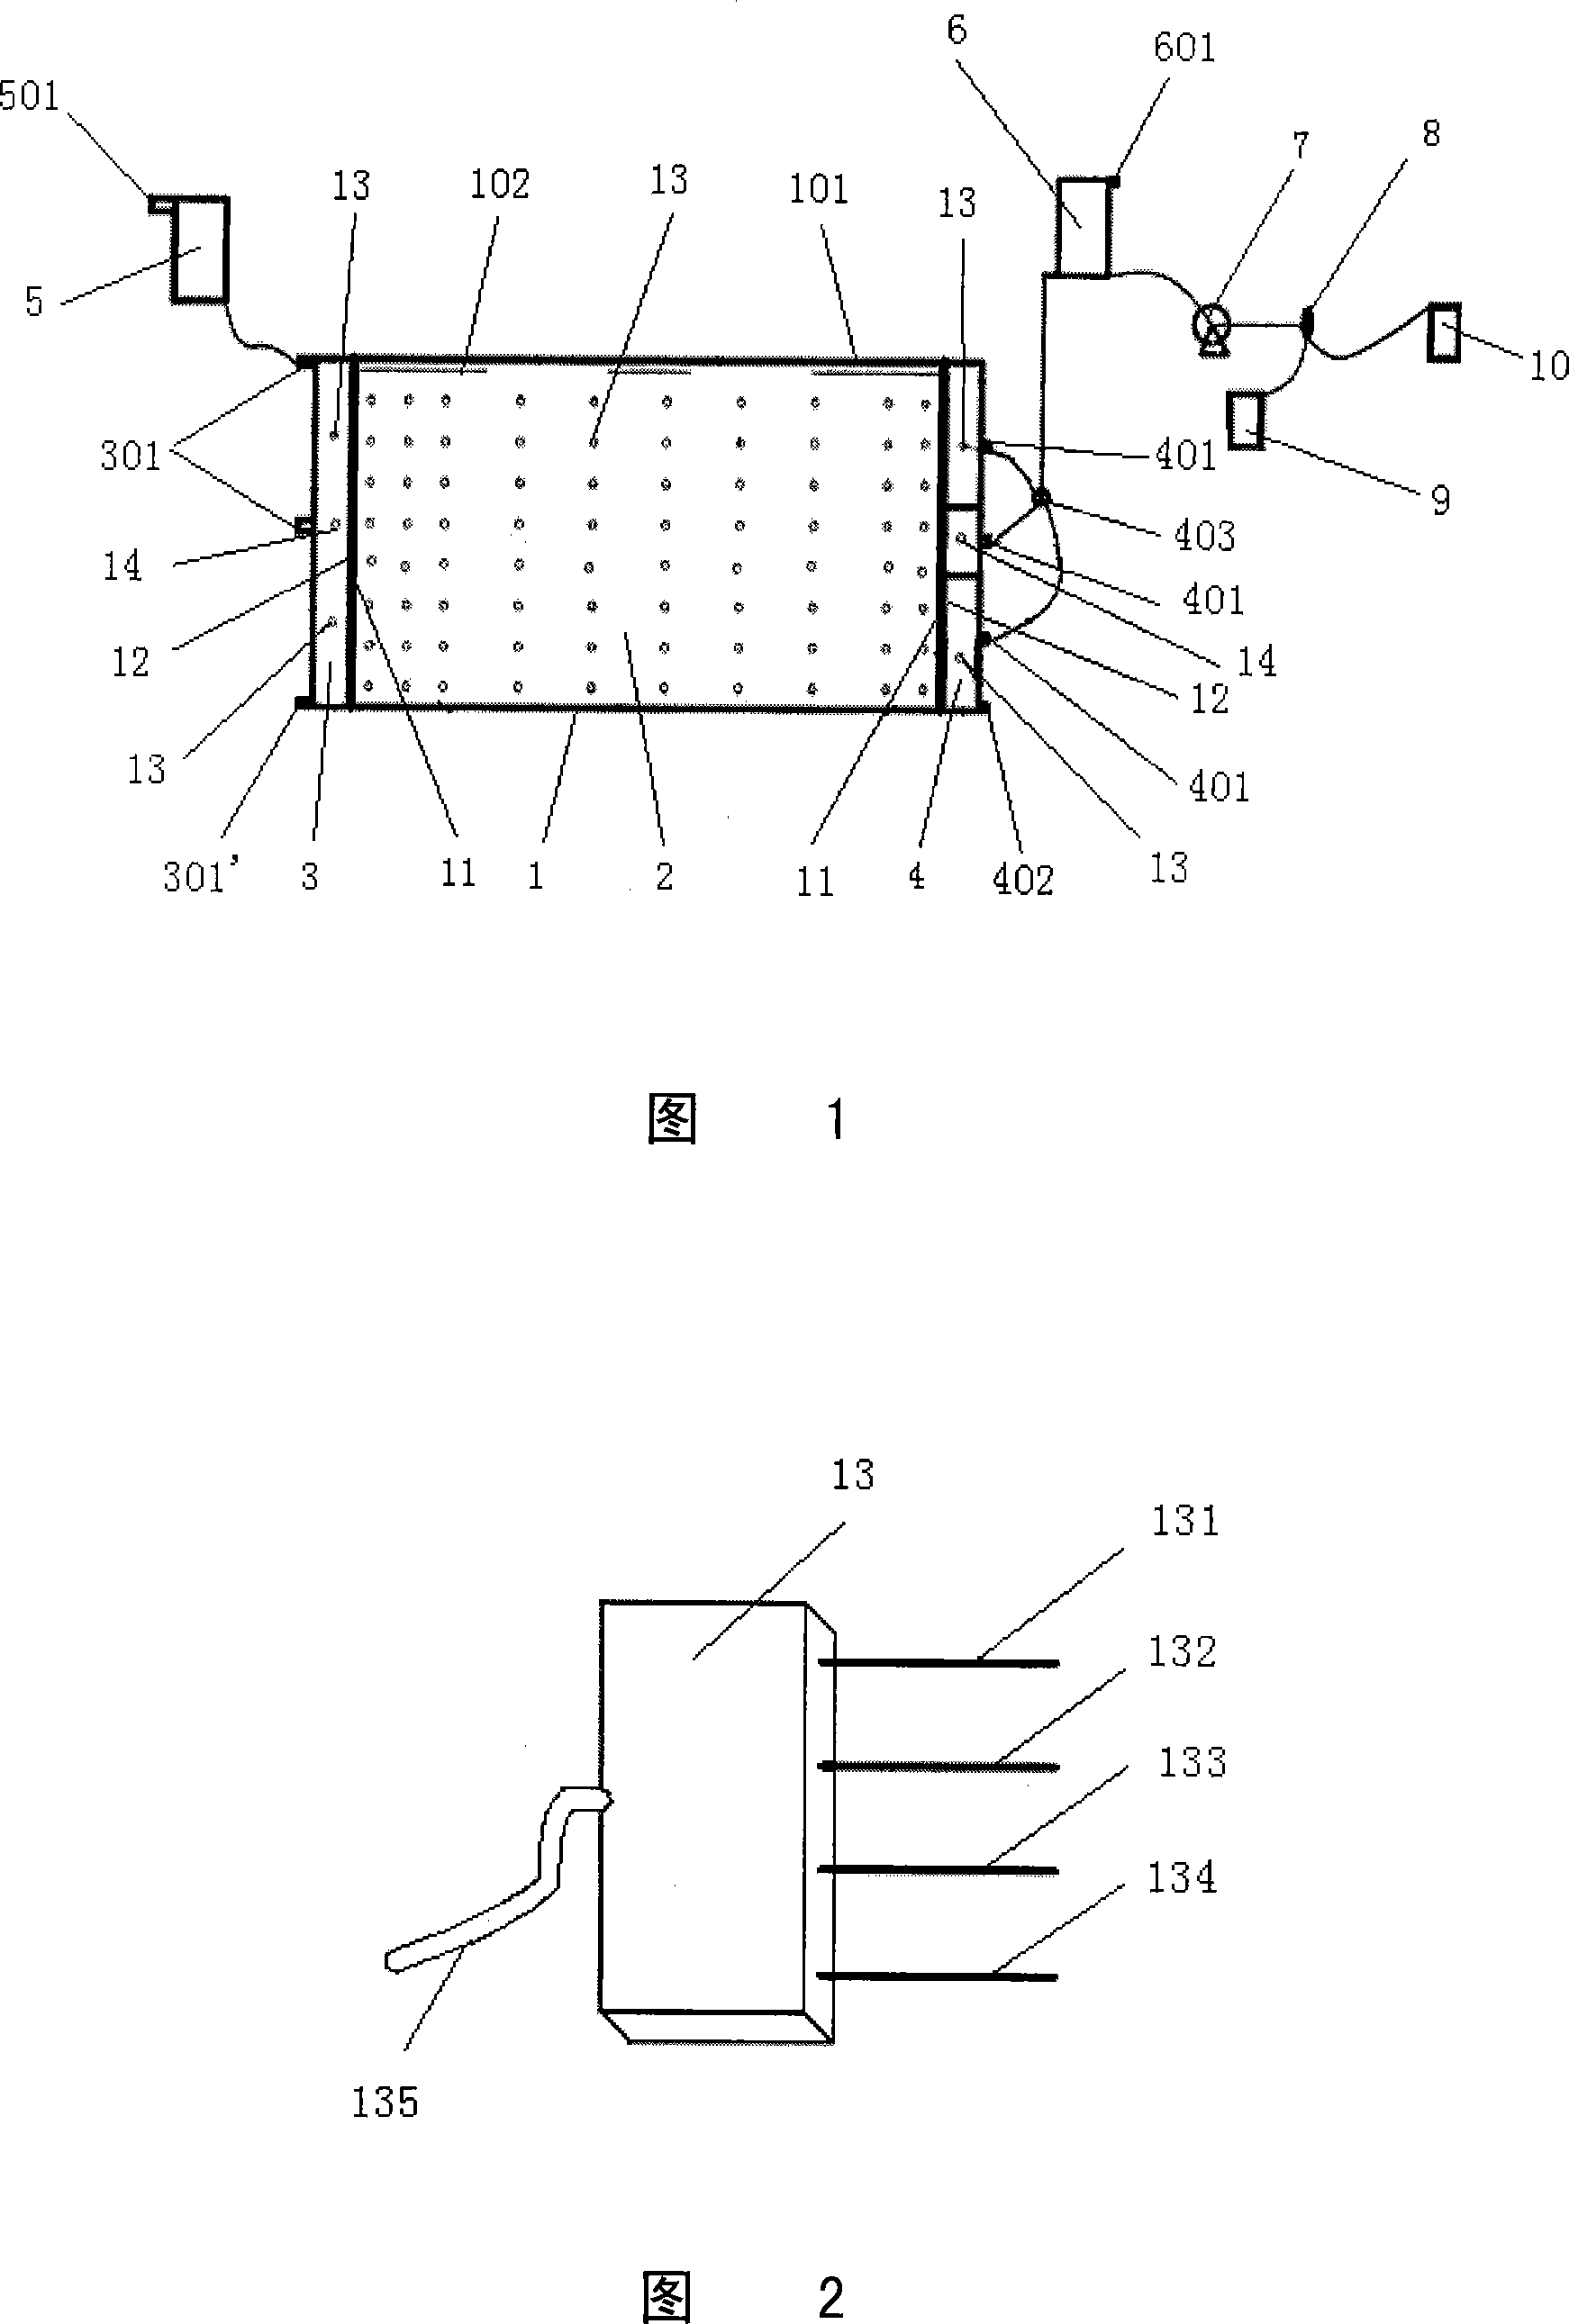 Device for measuring salt concentration of saturated soil solution